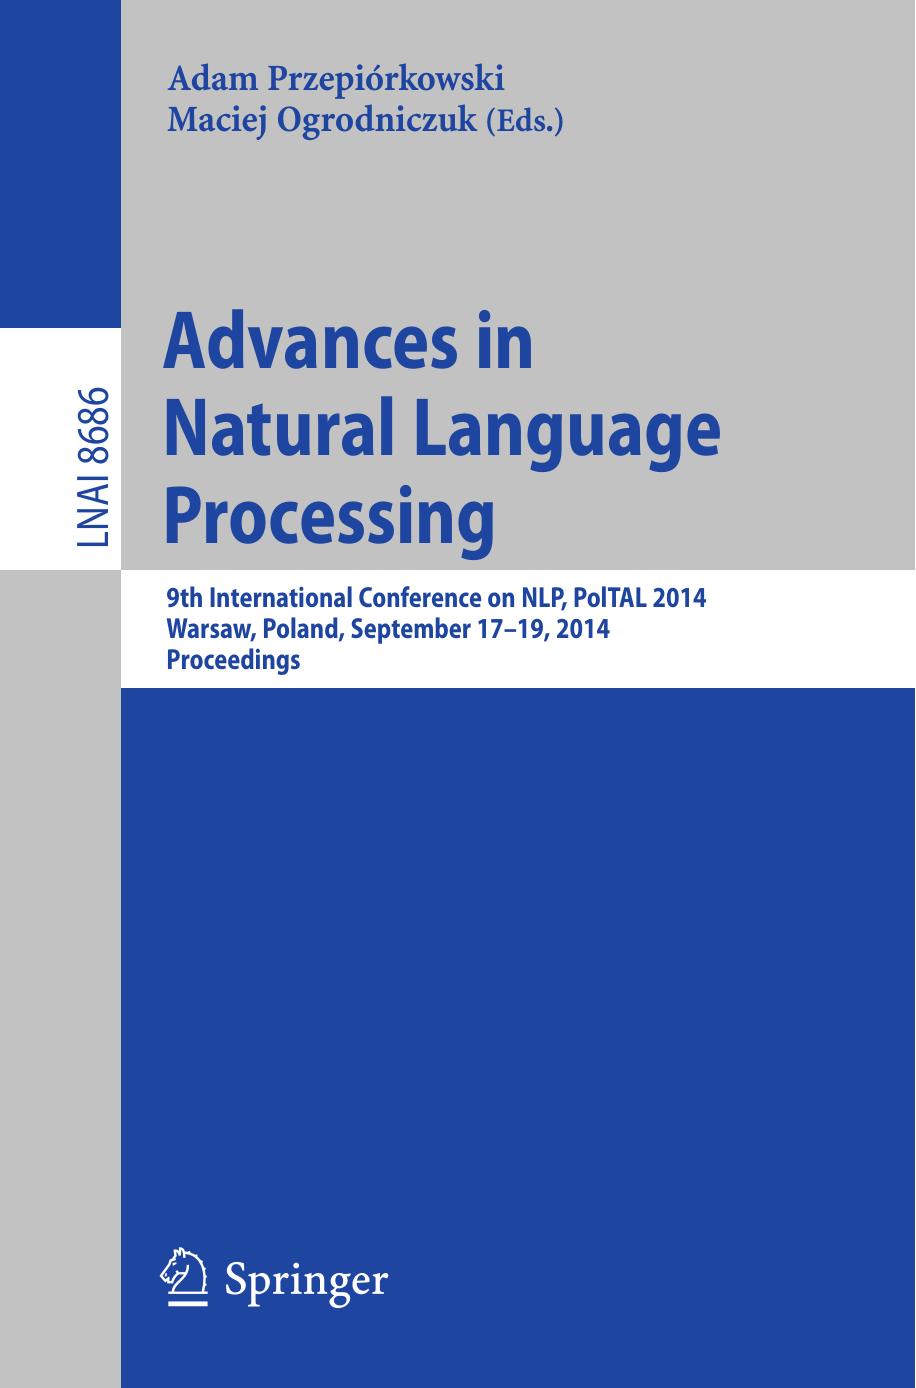 Advances in Natural Language Processing: 9th International Conference on NLP, PolTAL 2014, Warsaw, Poland, September 17-19, 2014. Proceedings